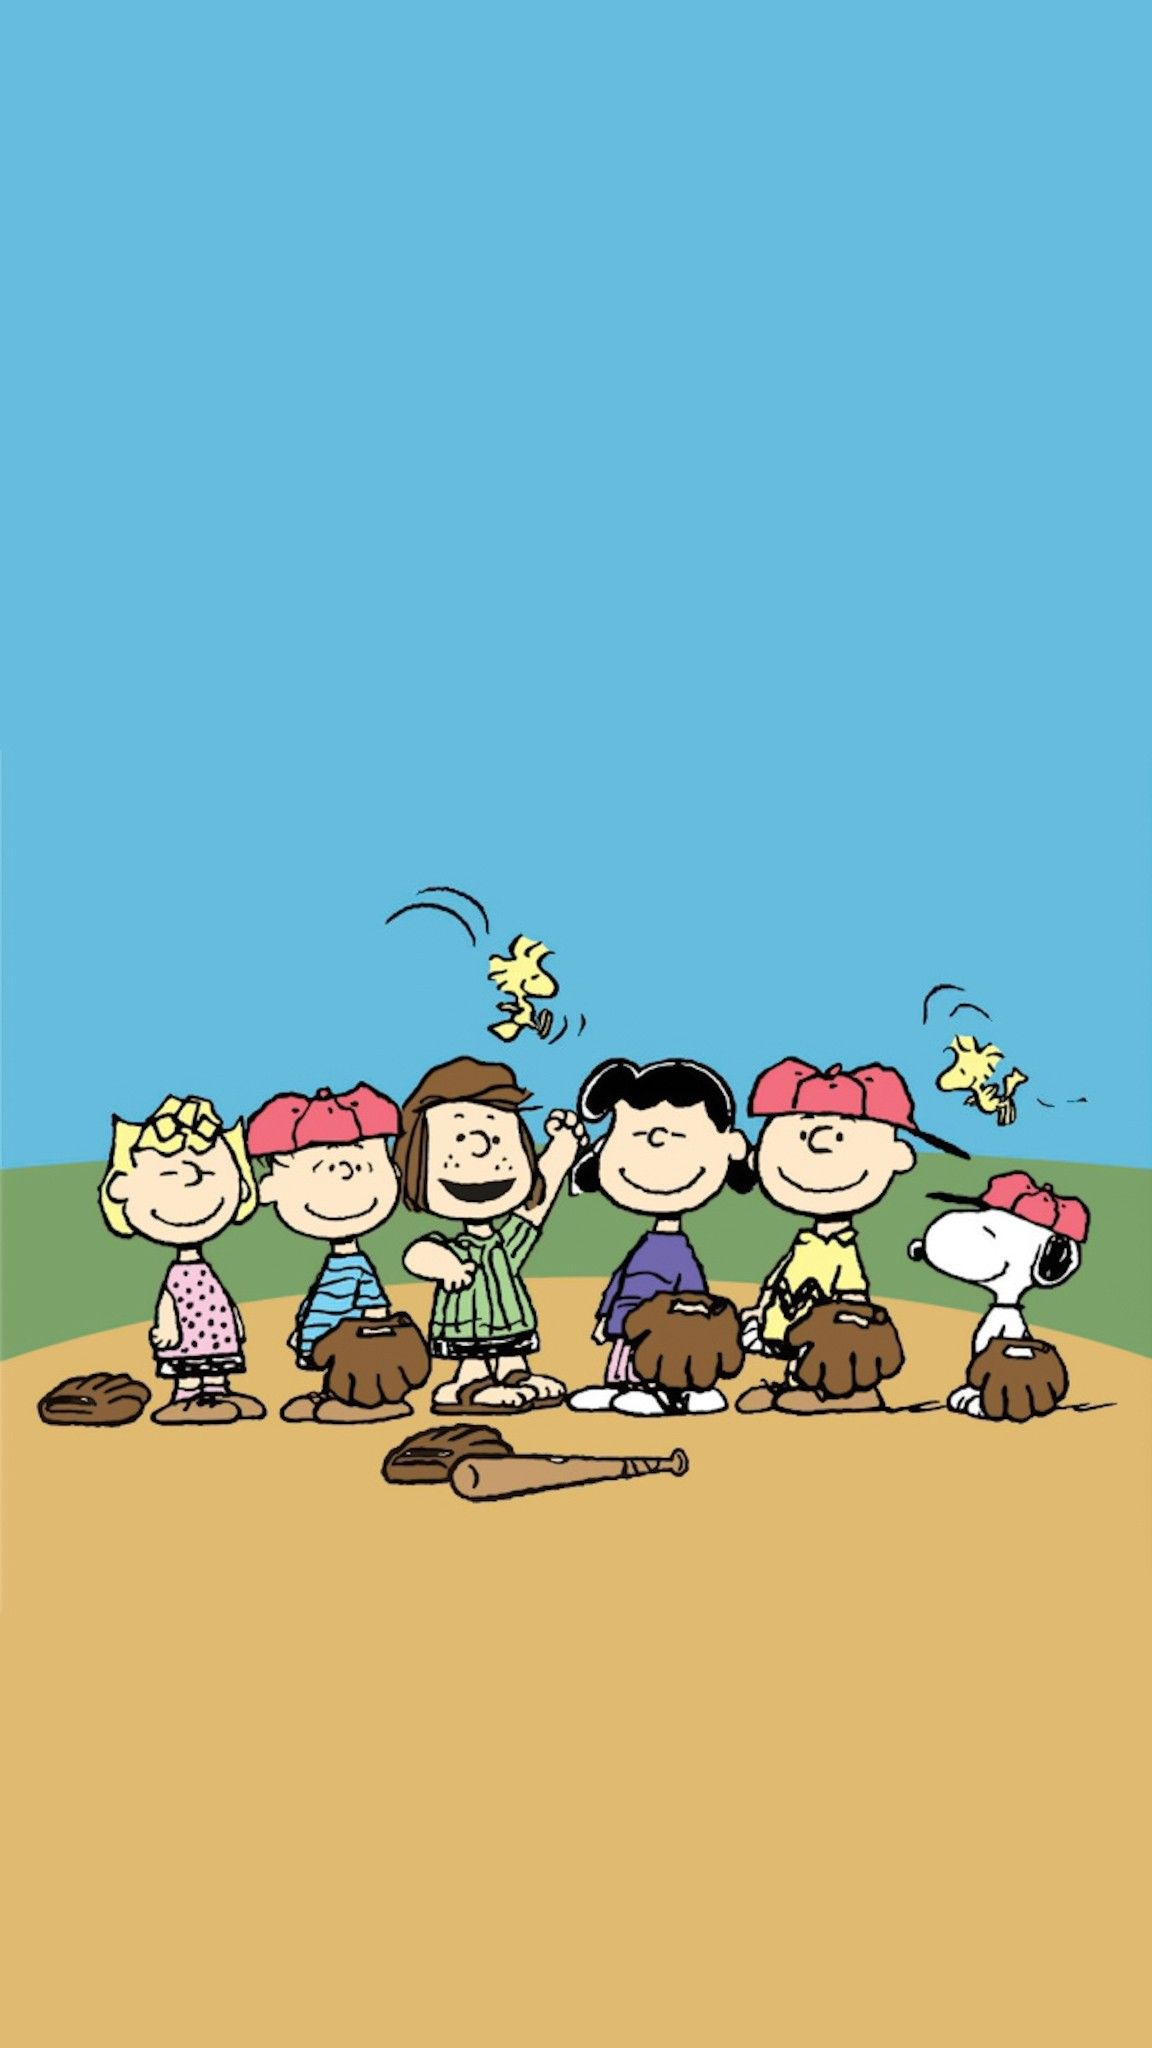 1152x2048 Pin by Aekkalisa on Snoopy | Snoopy wallpaper, Peanuts wallpaper, Snoopy pictures